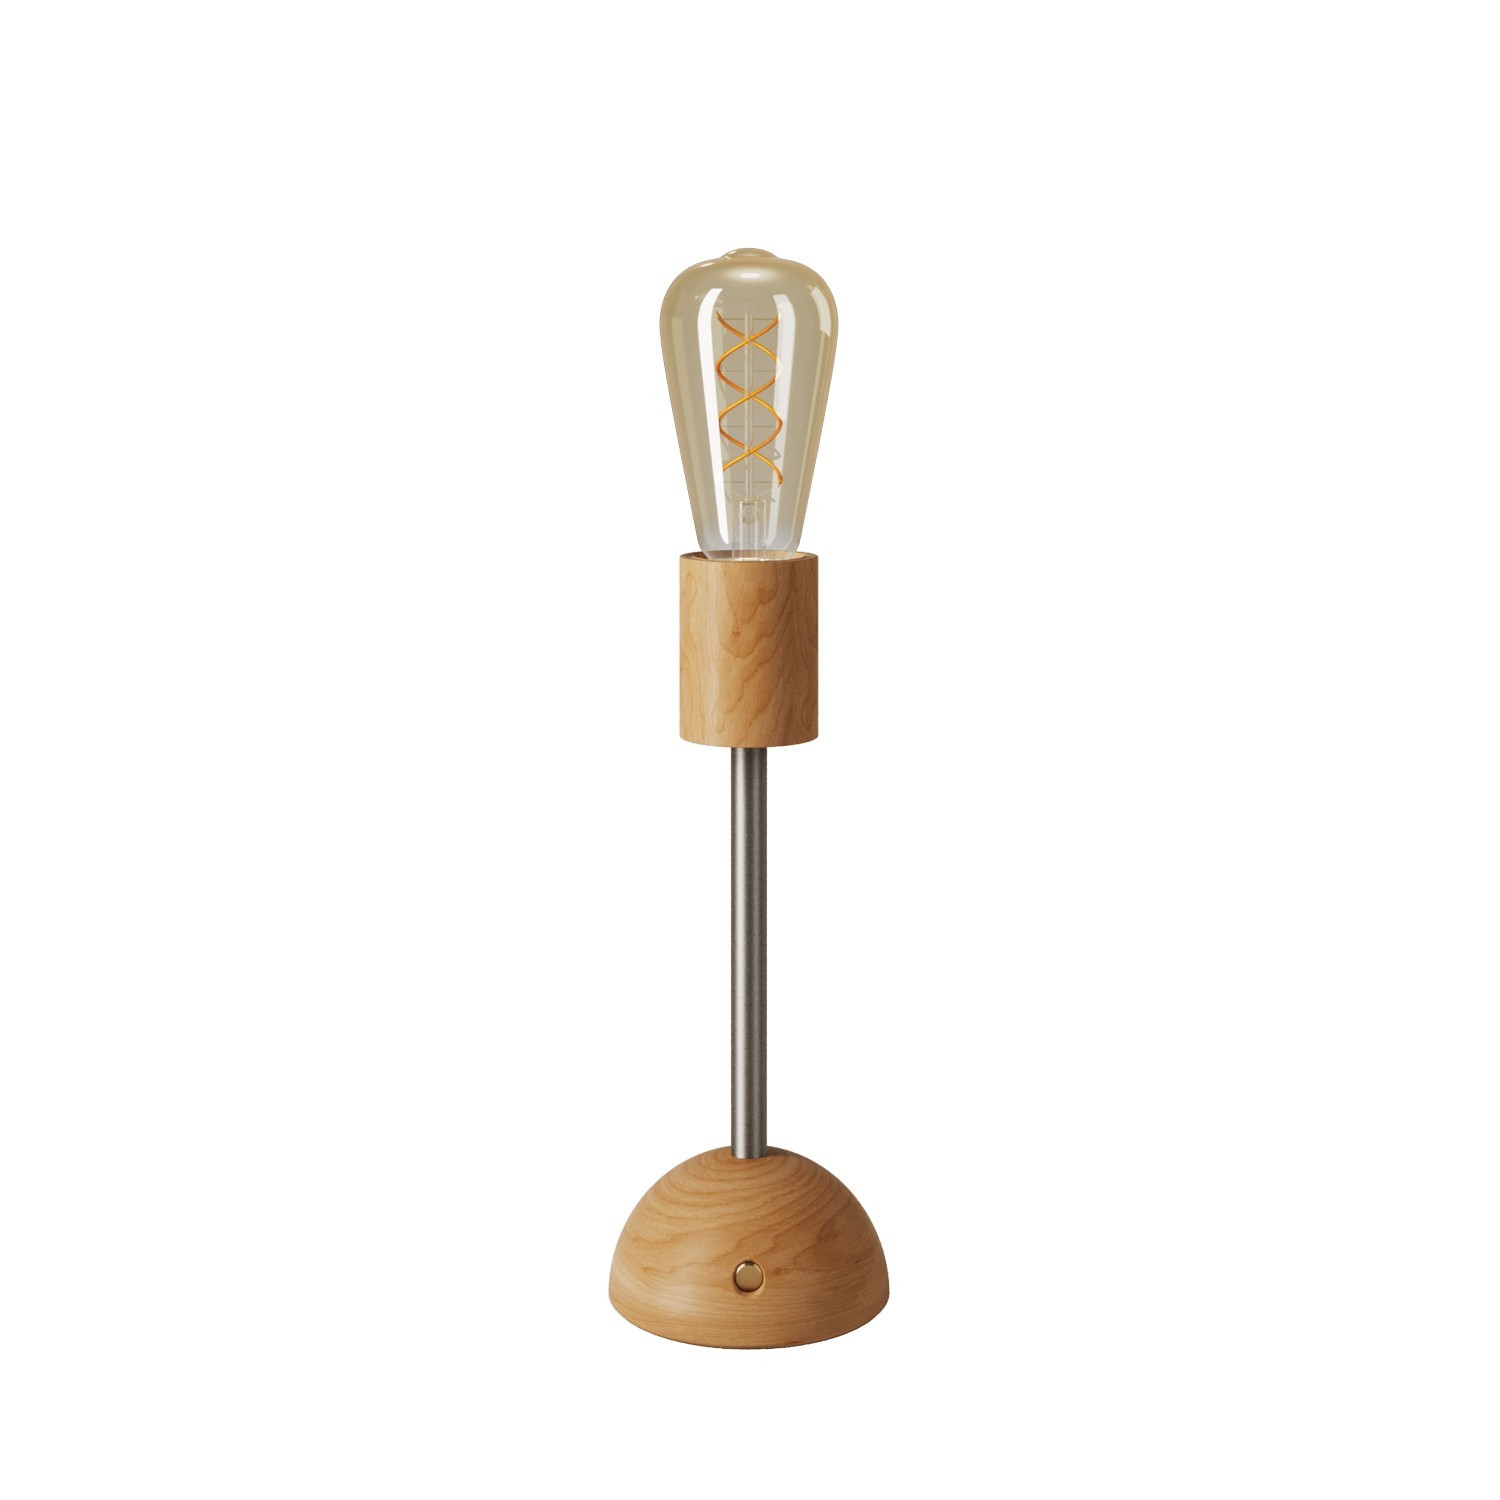 Portable and rechargeable Cabless02 Lamp with golden Edison light bulb